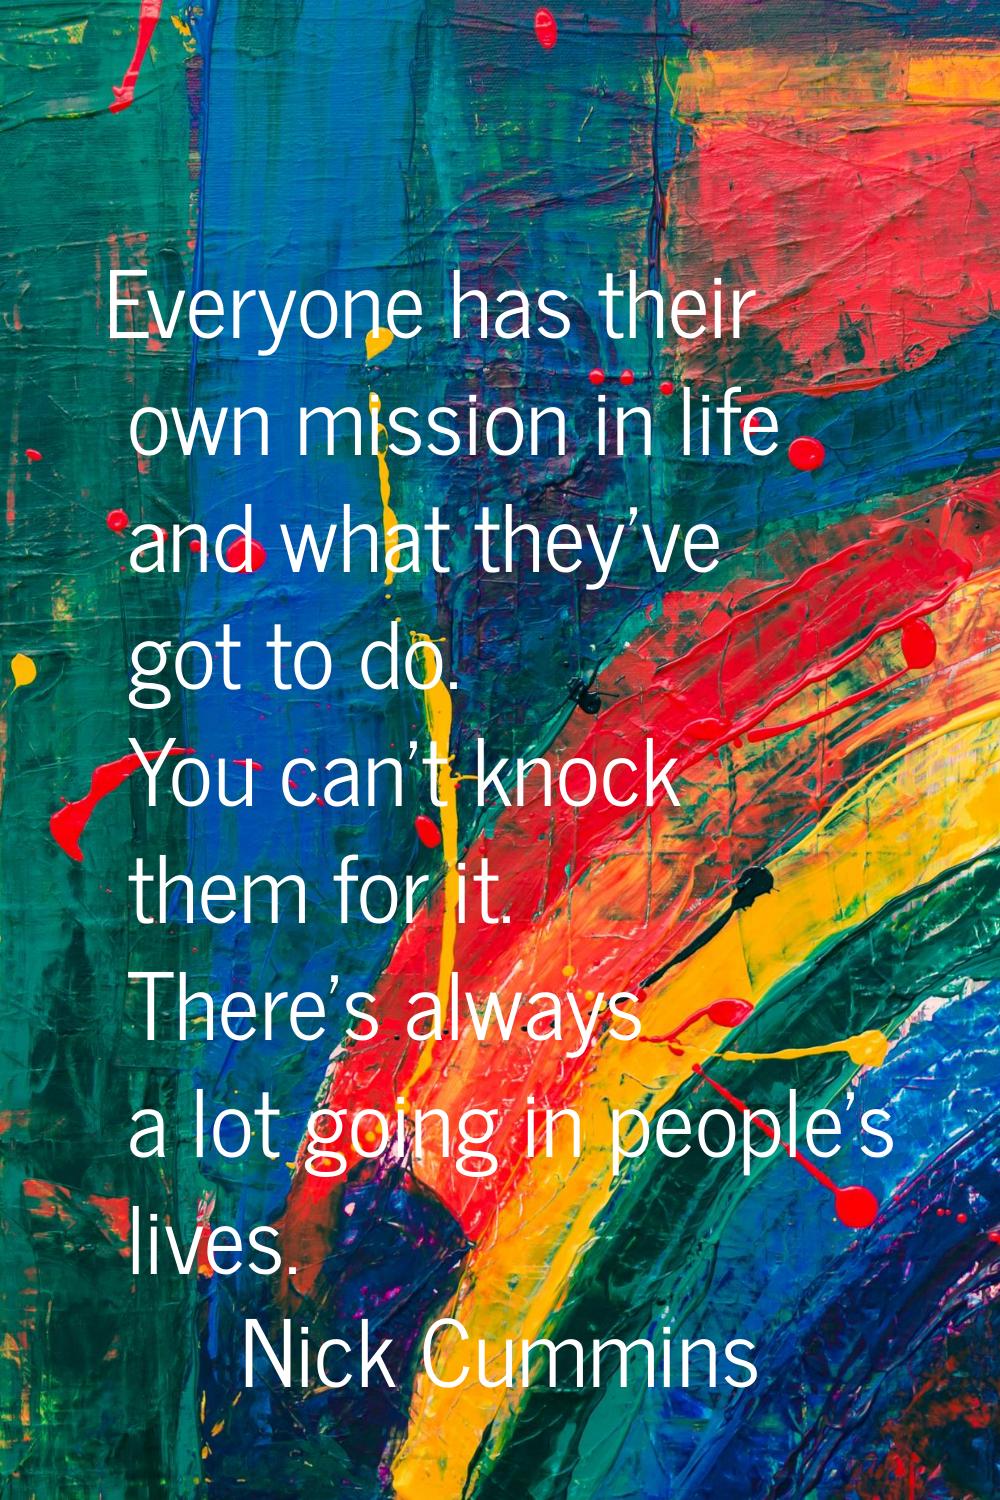 Everyone has their own mission in life and what they've got to do. You can't knock them for it. The